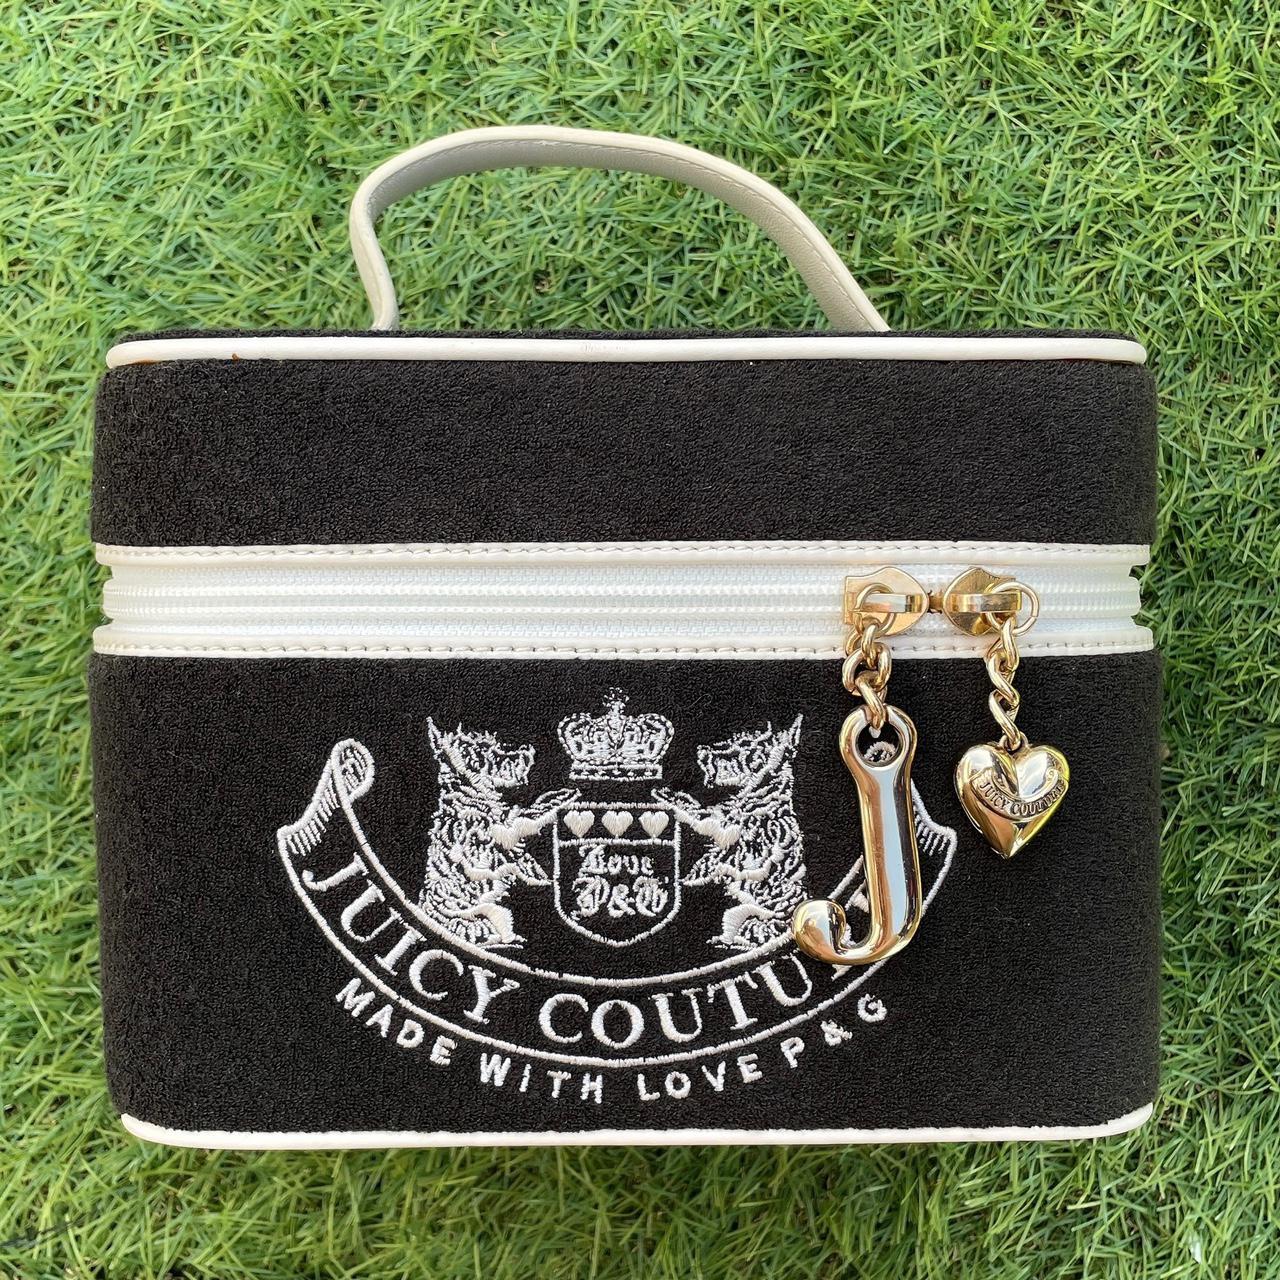 Juicy Couture Women's Black and White Bag